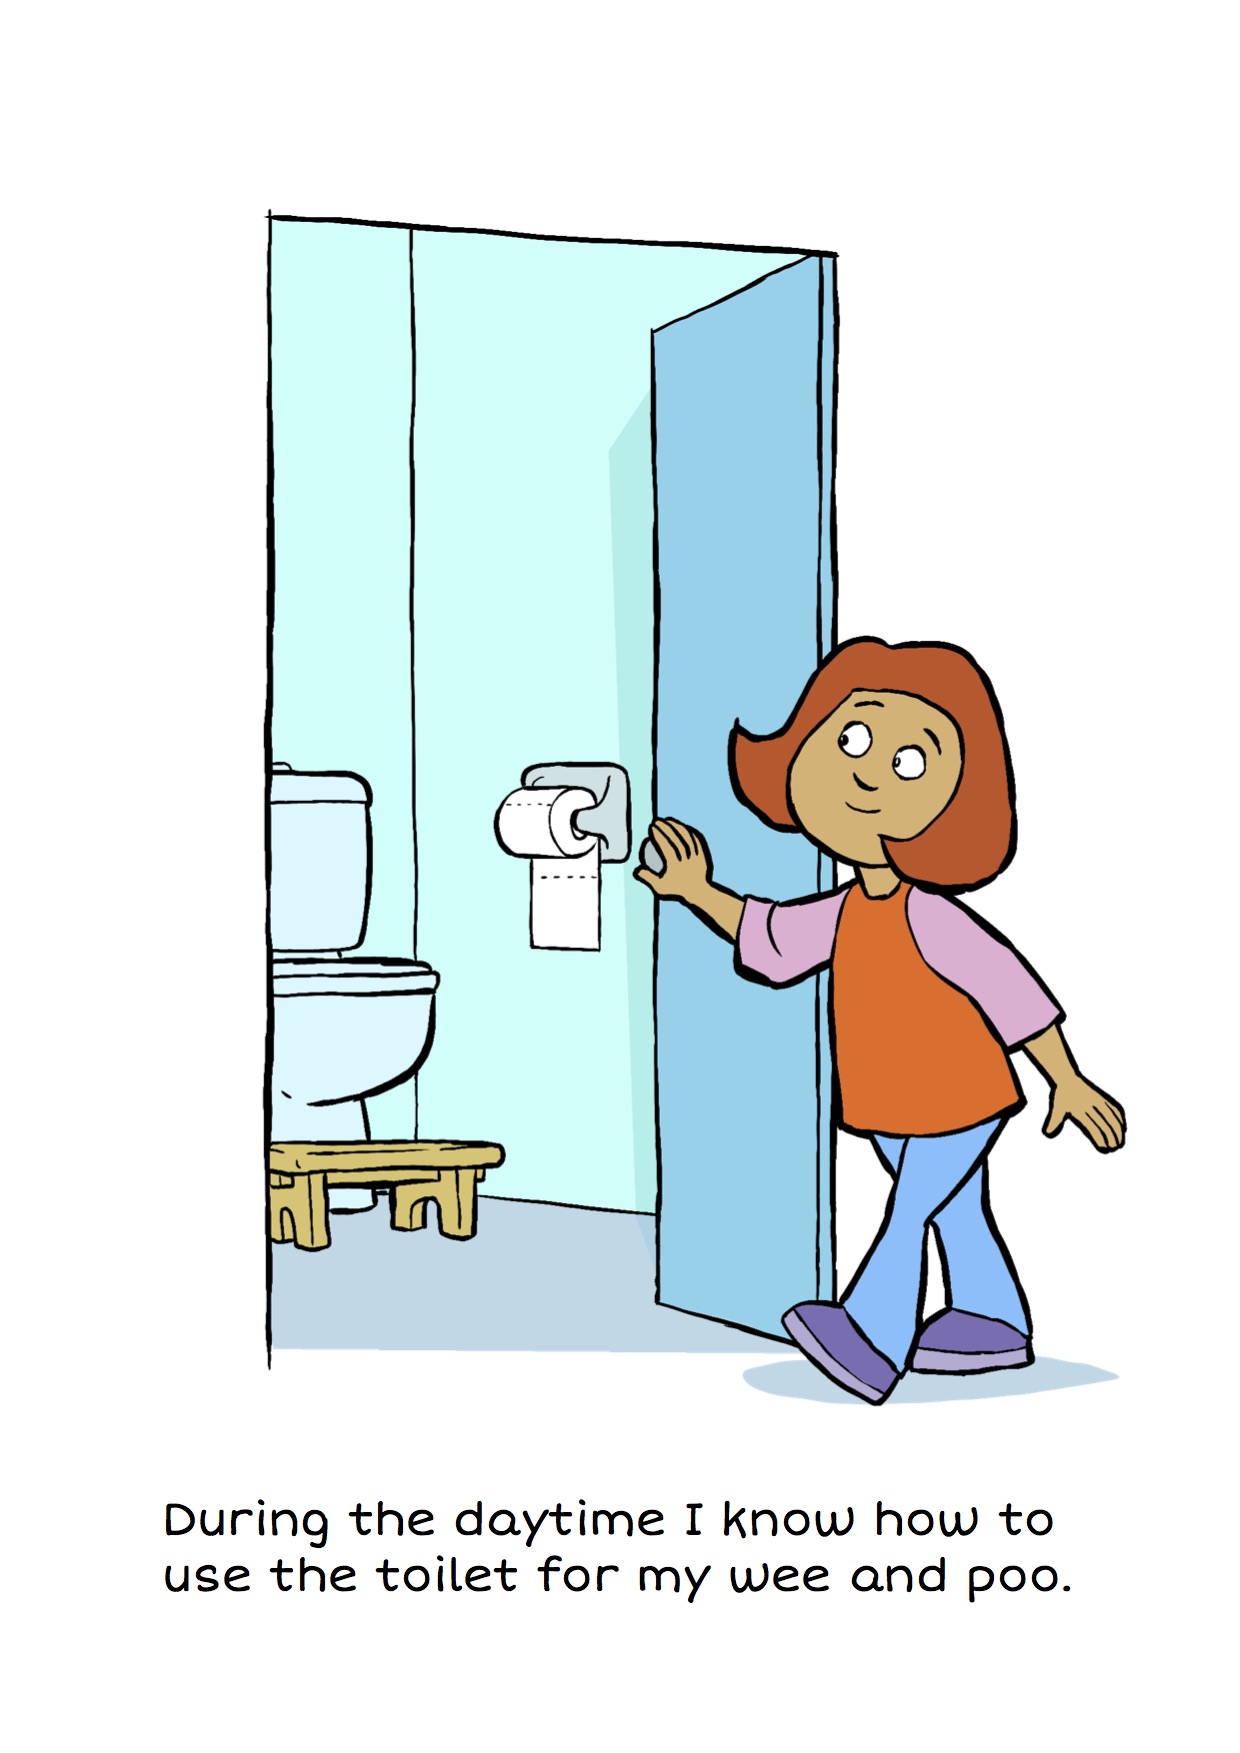 Toilet Time: A story for girls learning to use the toilet during the night